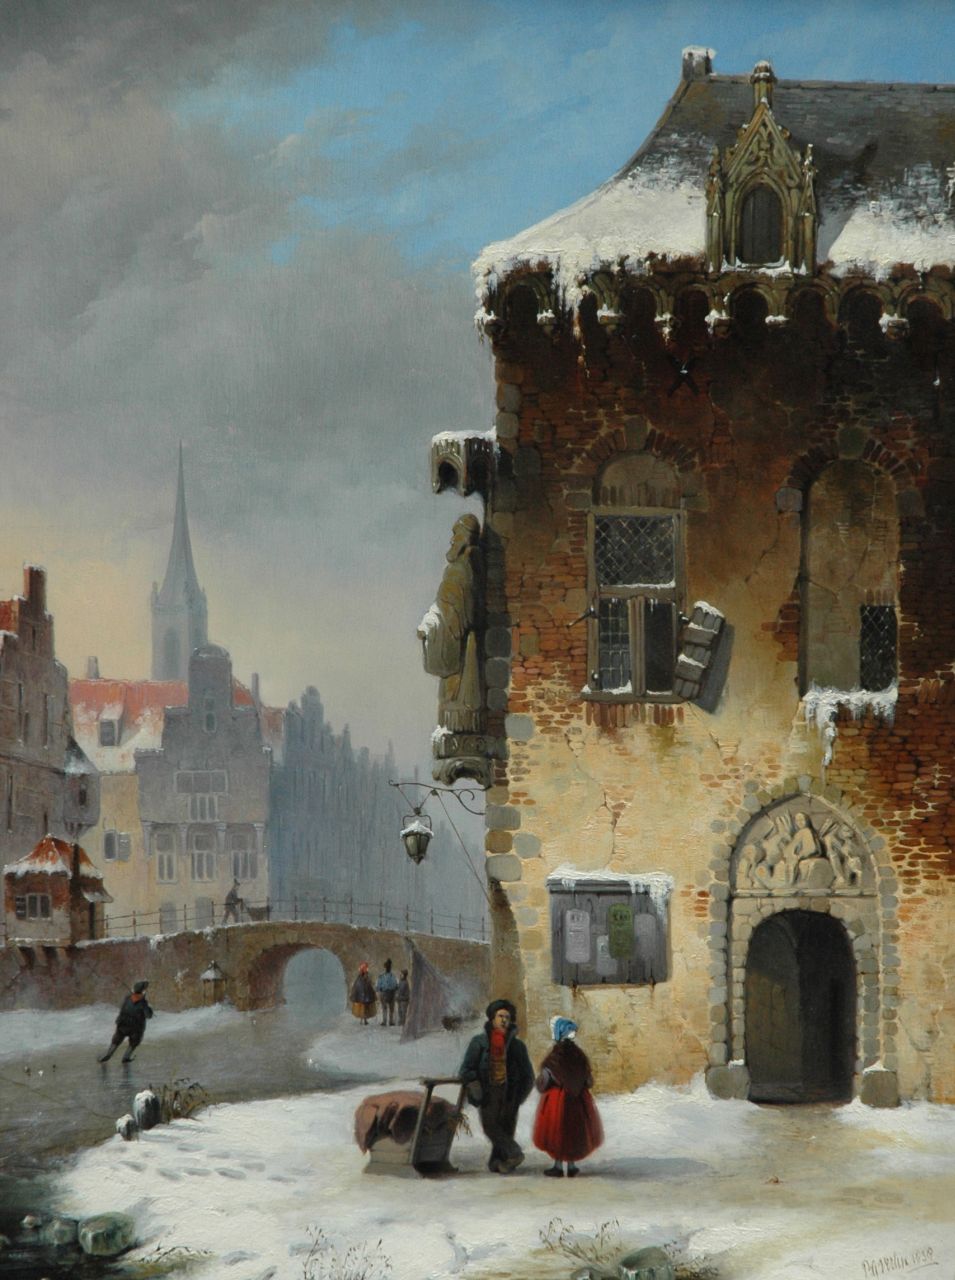 Vertin P.G.  | Petrus Gerardus Vertin, A town in winter with strollers and skaters, Öl auf Holz 51,2 x 38,9 cm, signed l.r. und painted 1838